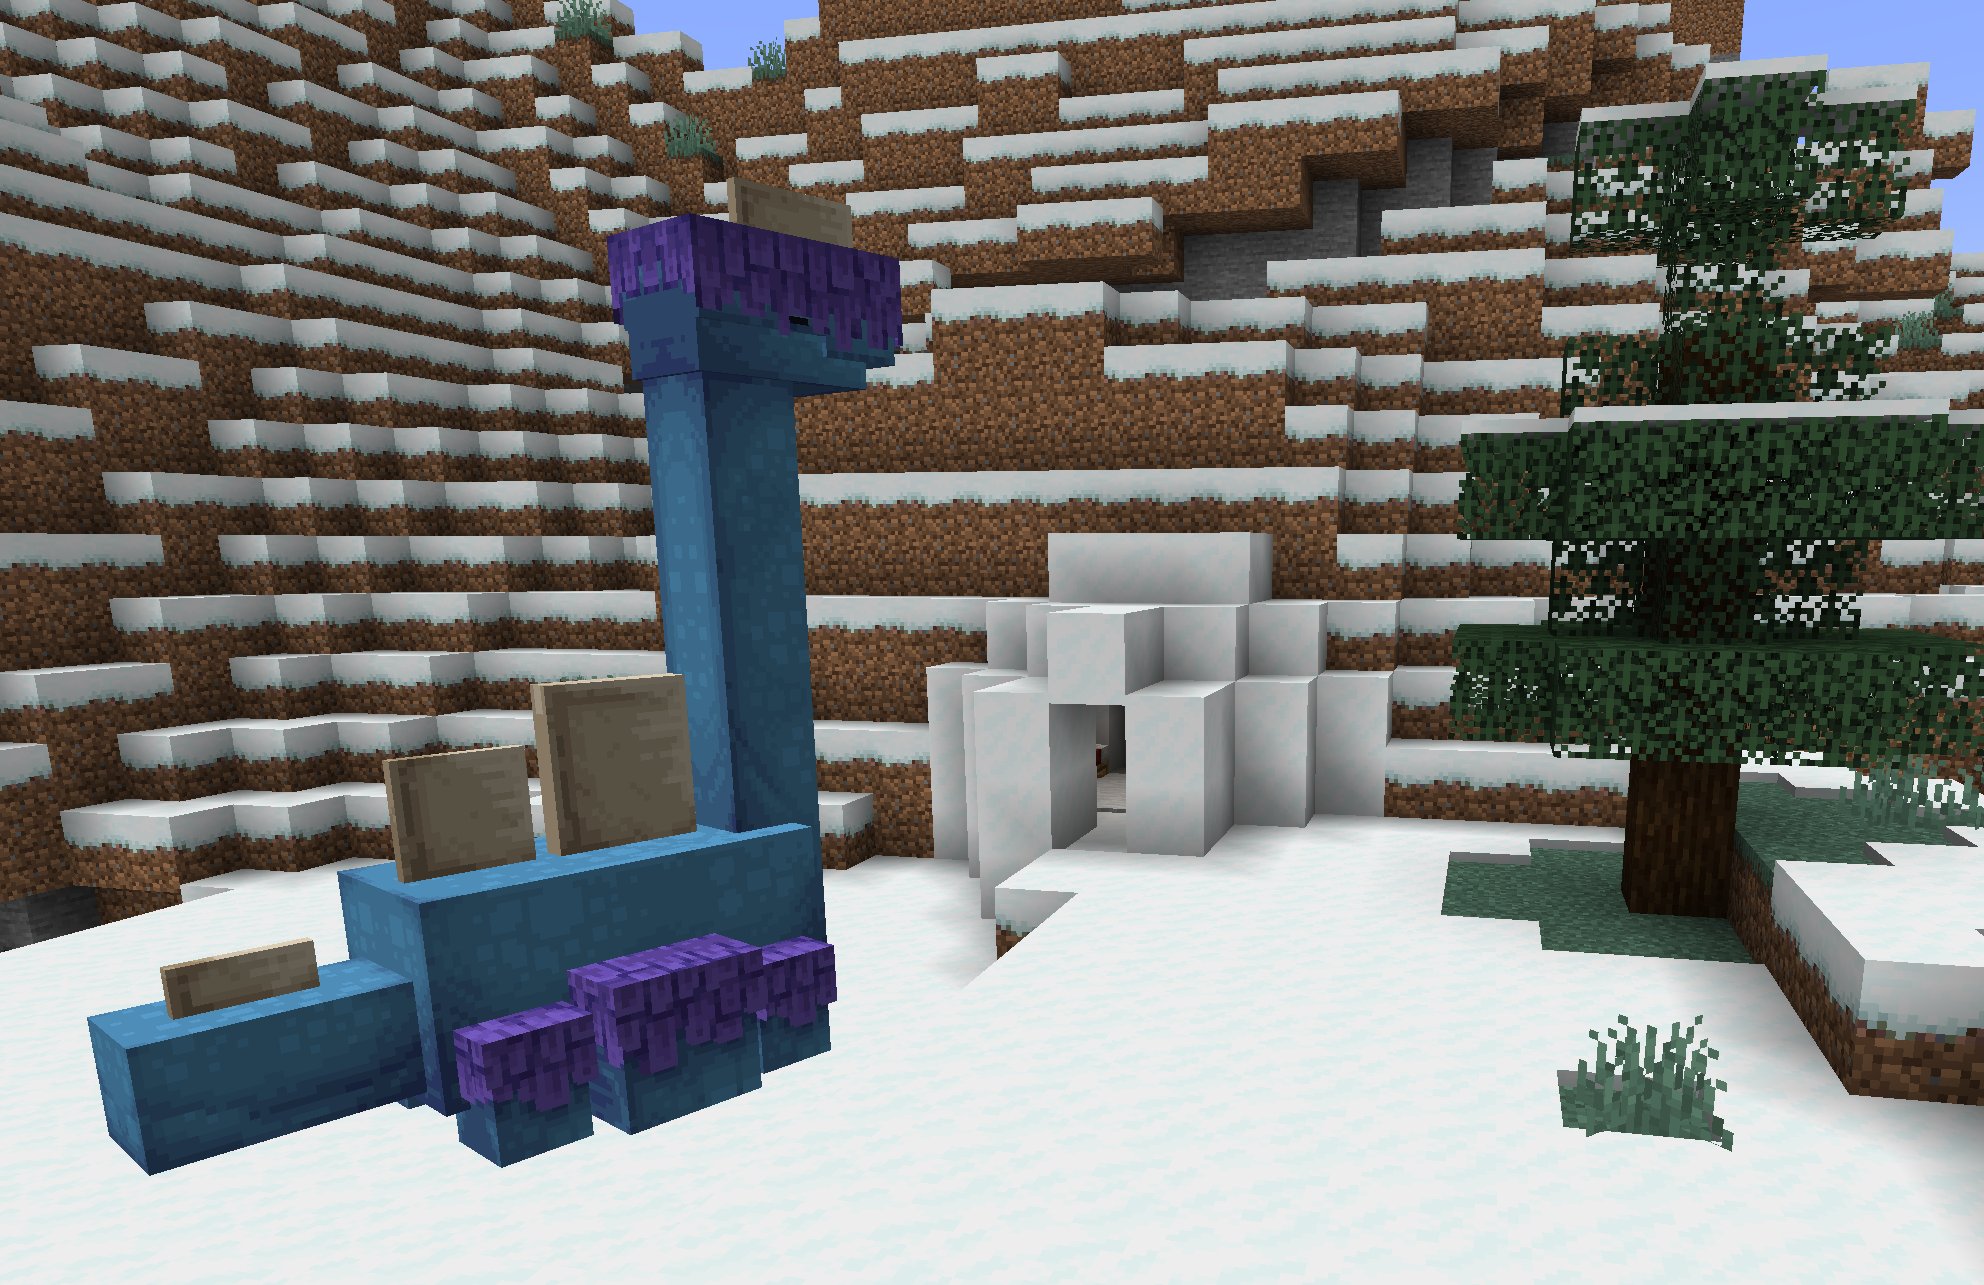 Minecraft Classic AT-AT Snow-walker Top View by xN8Gx on DeviantArt